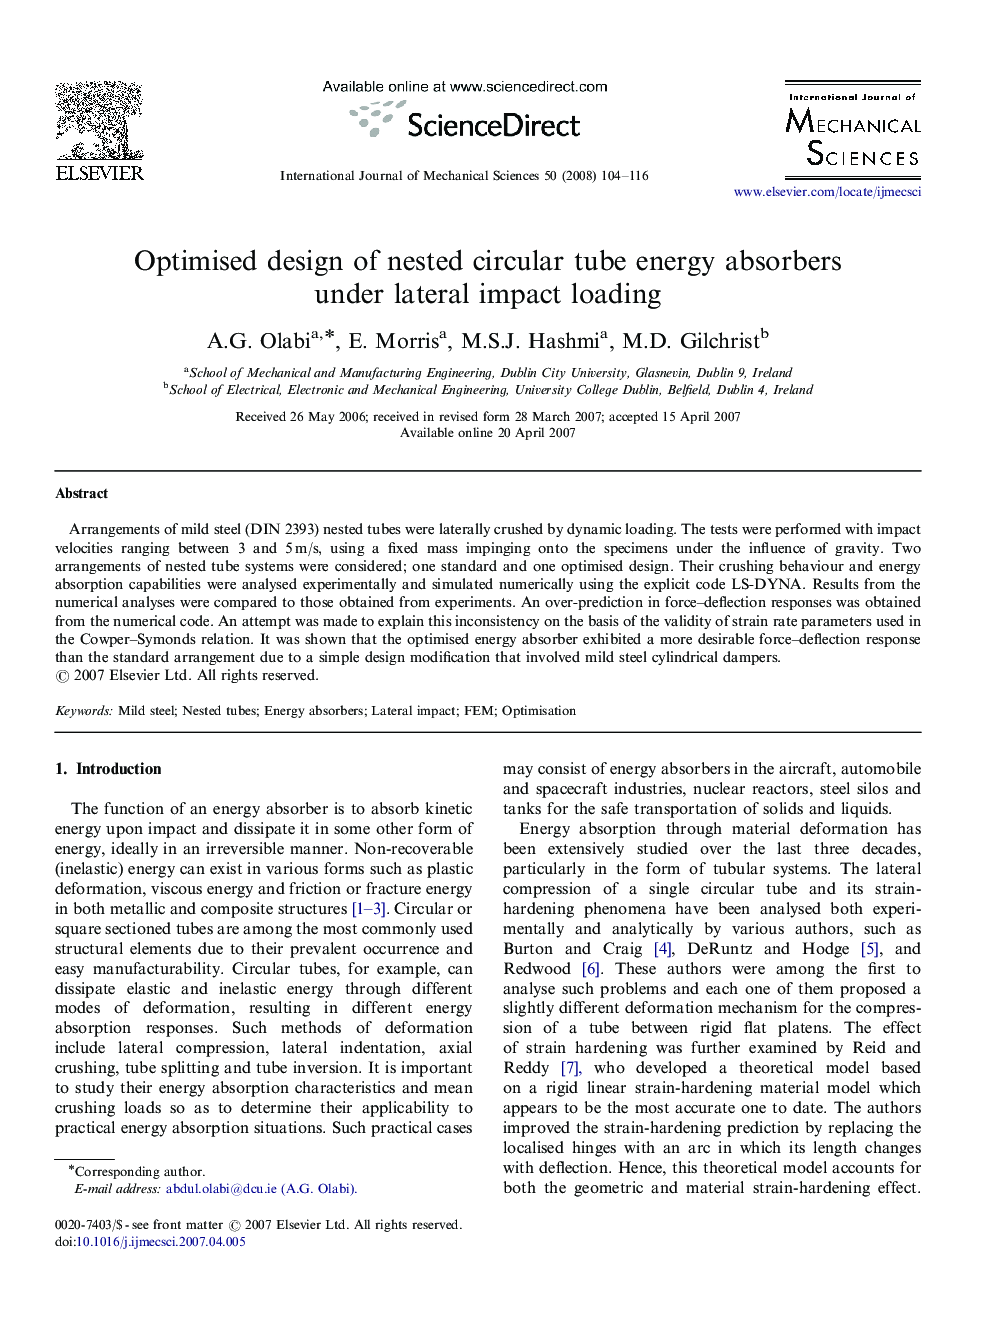 Optimised design of nested circular tube energy absorbers under lateral impact loading